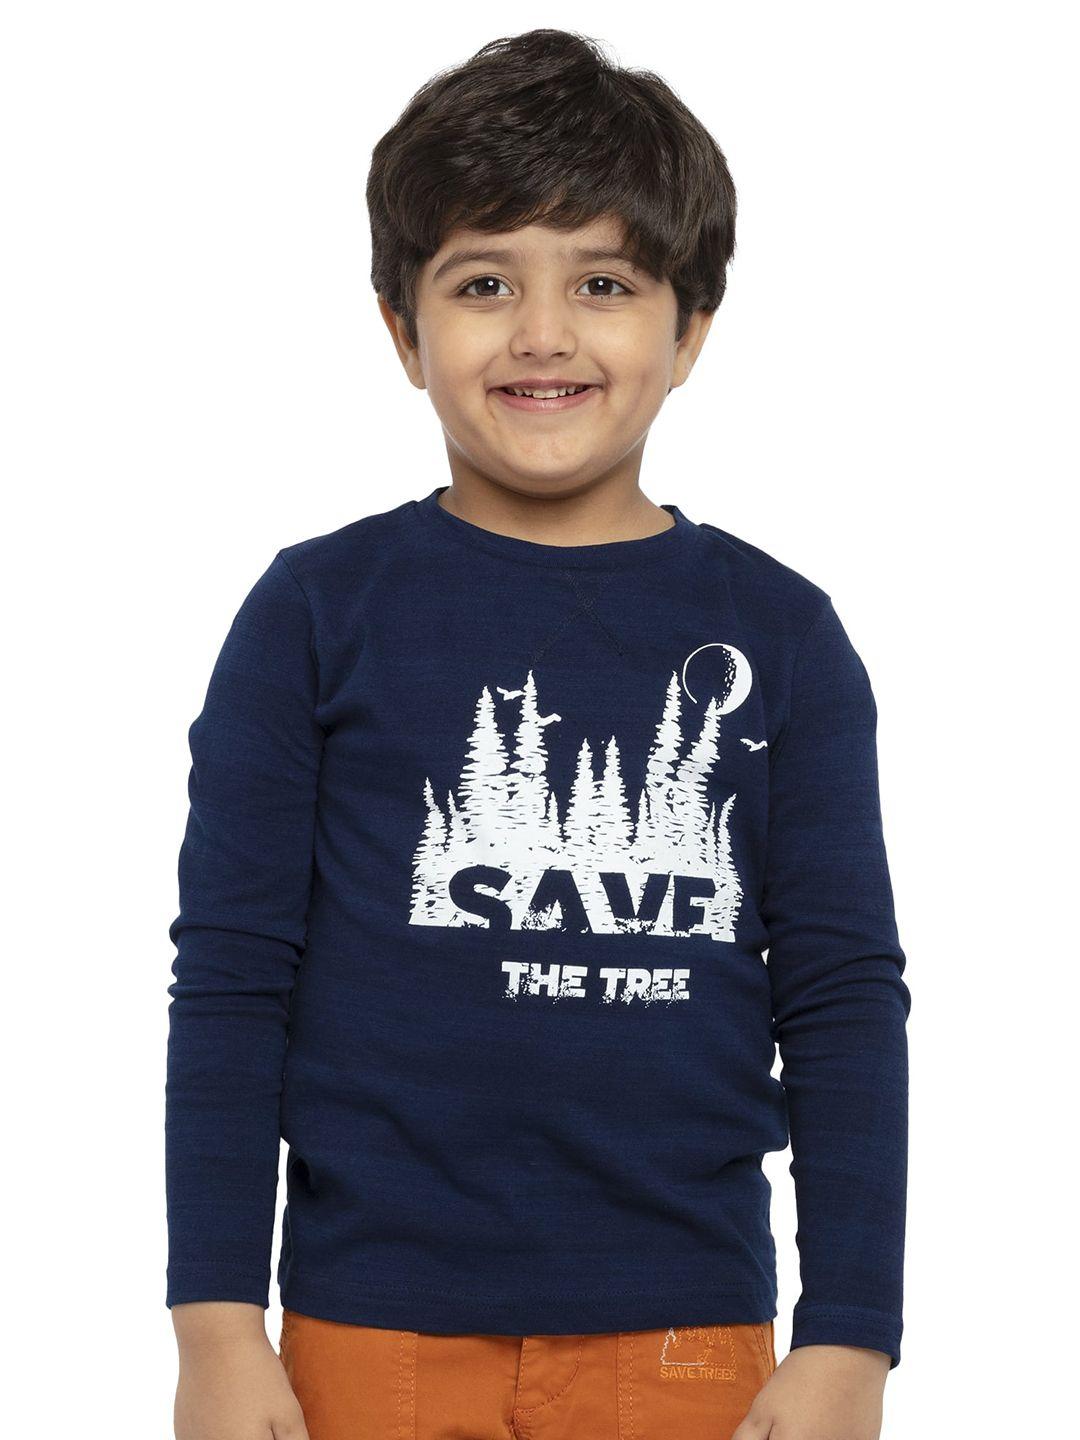 under fourteen only boys navy blue & white cotton printed t-shirt